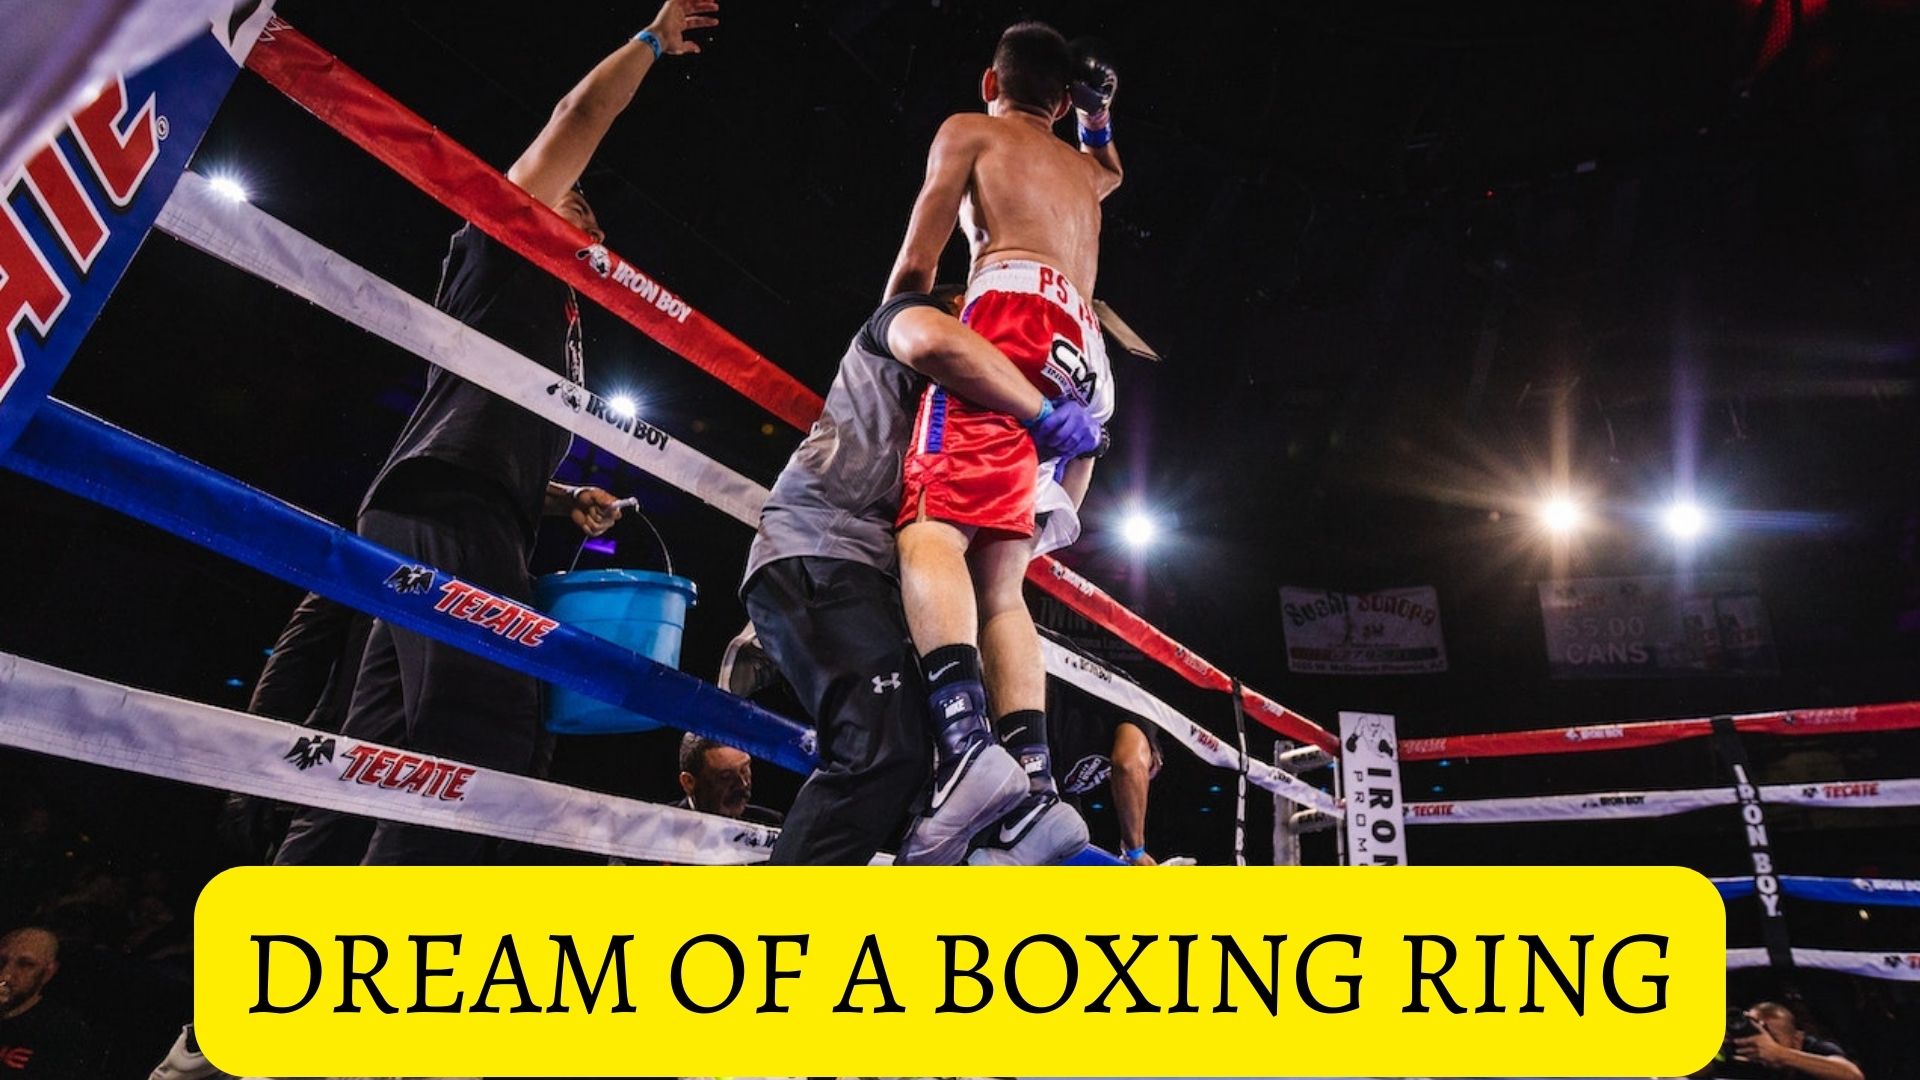 Dream Of A Boxing Ring - A Desire To Prove Your Worth